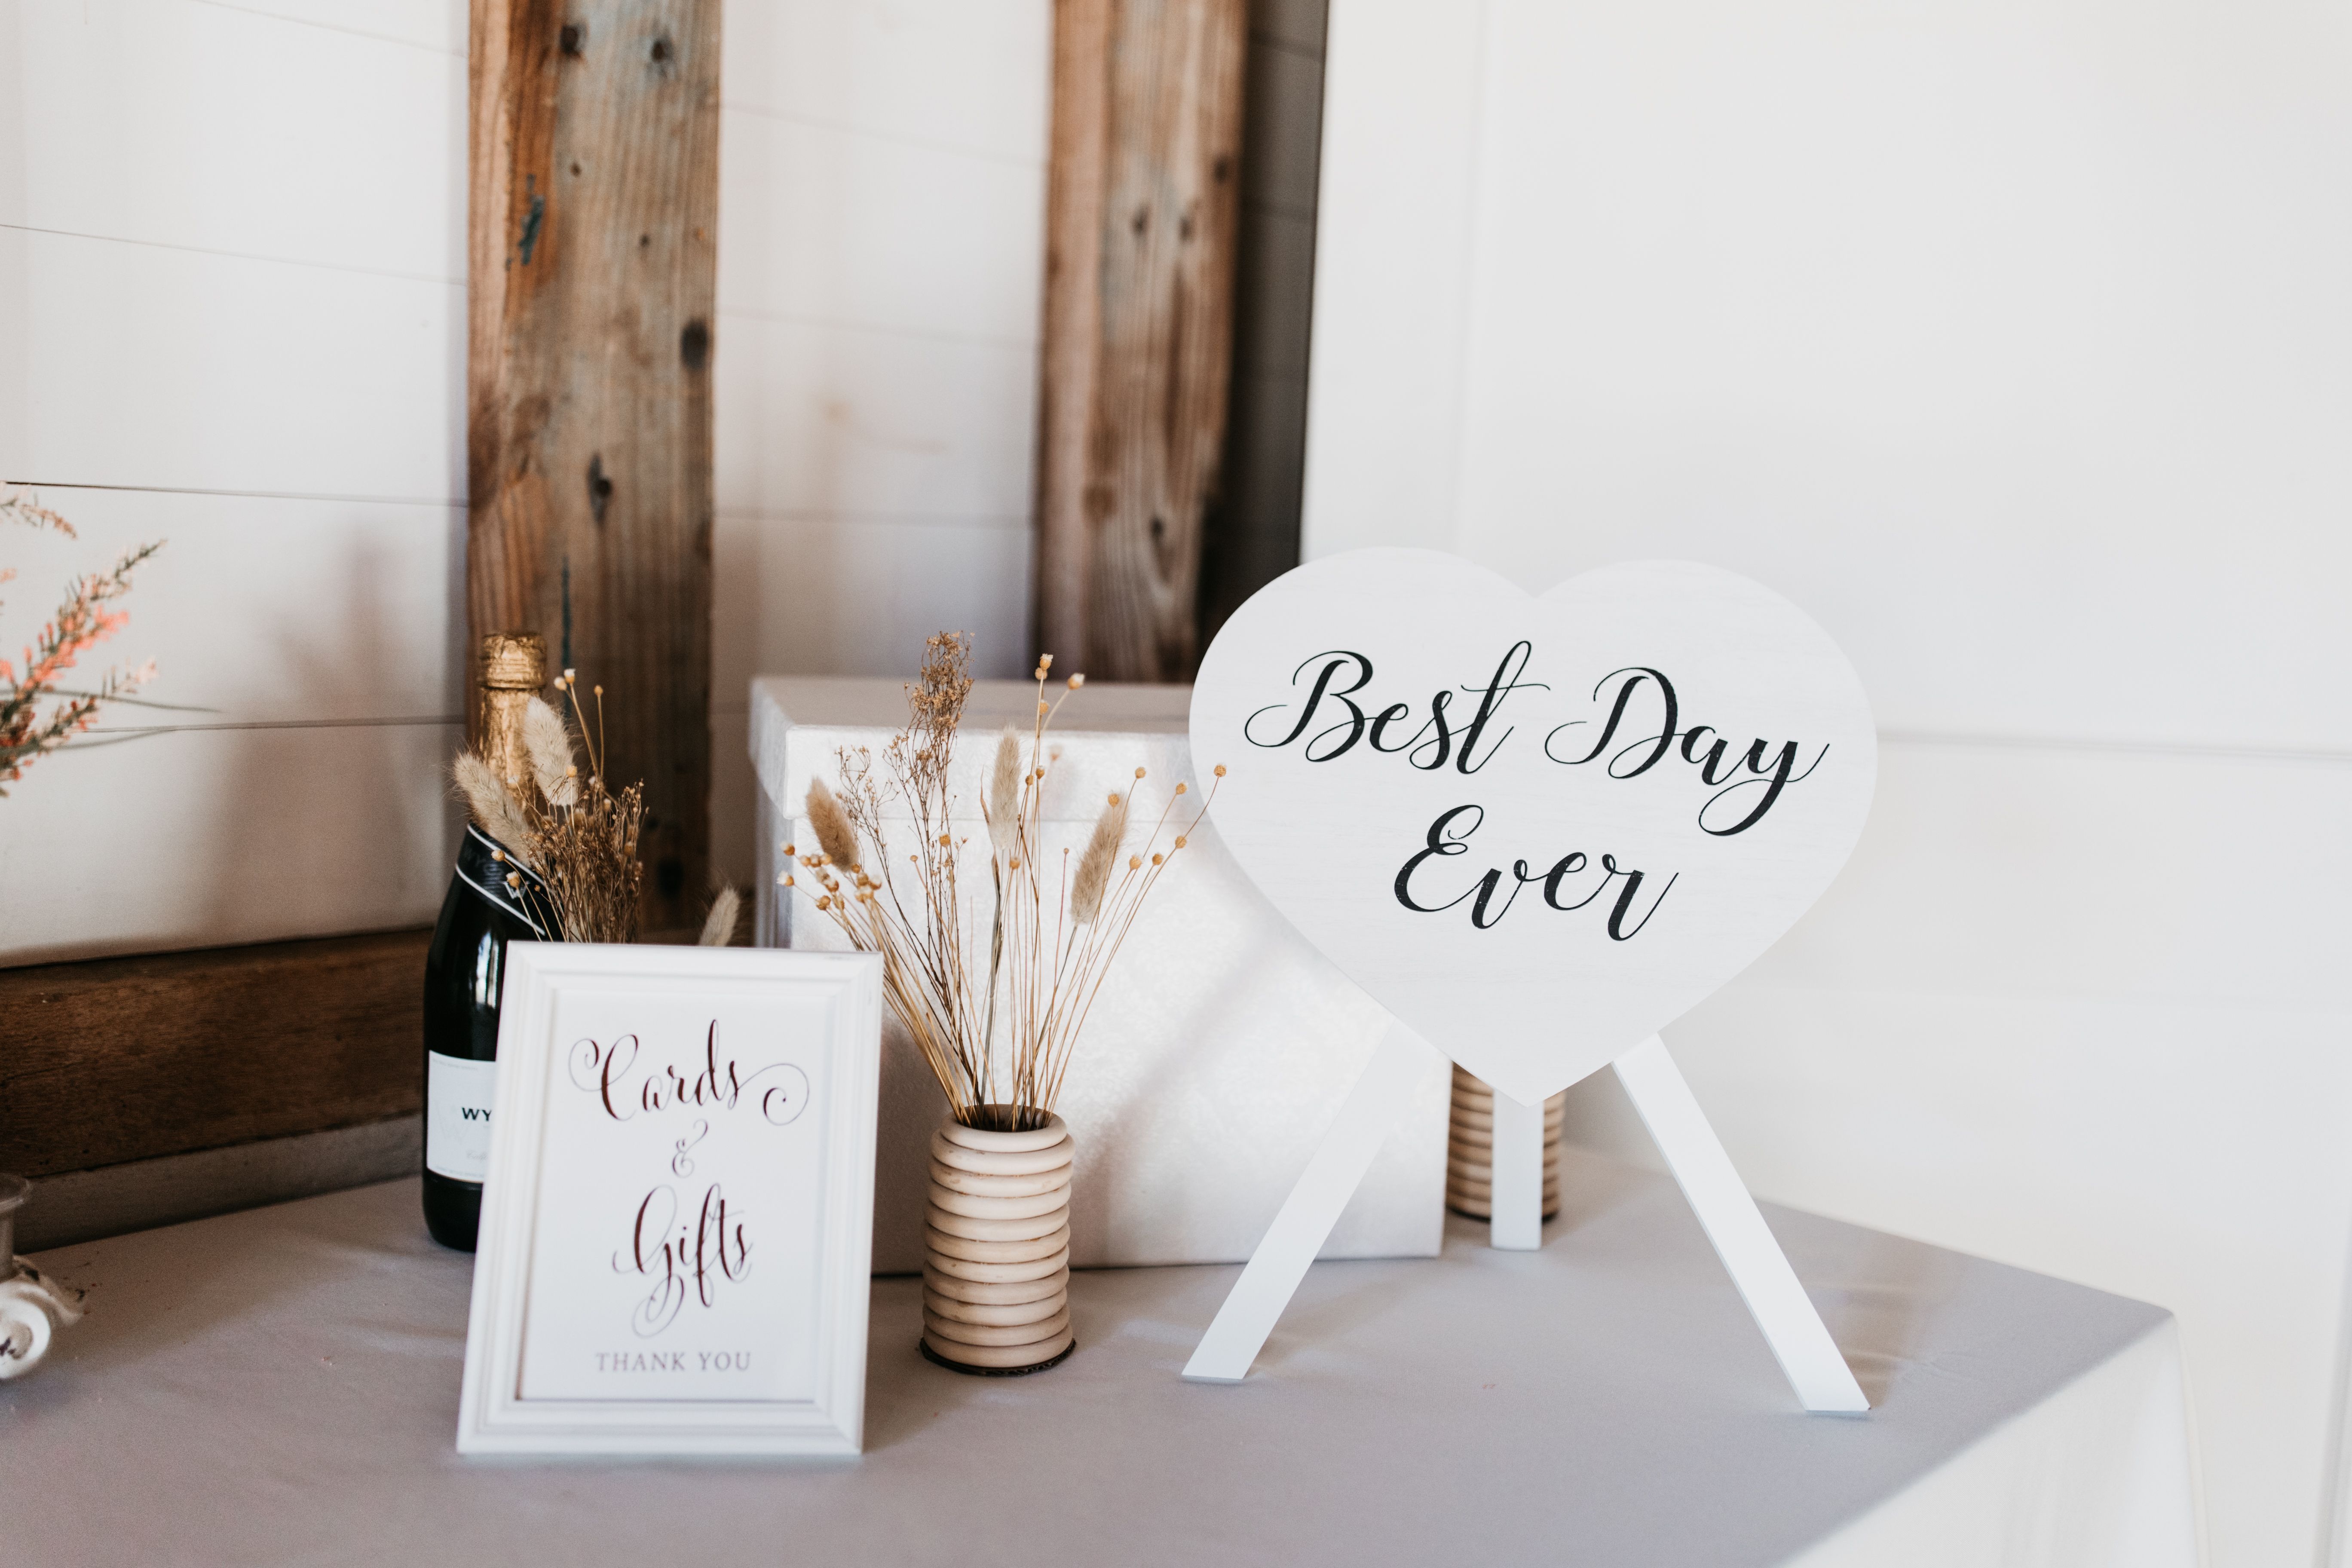 wedding signage for gifts and cards